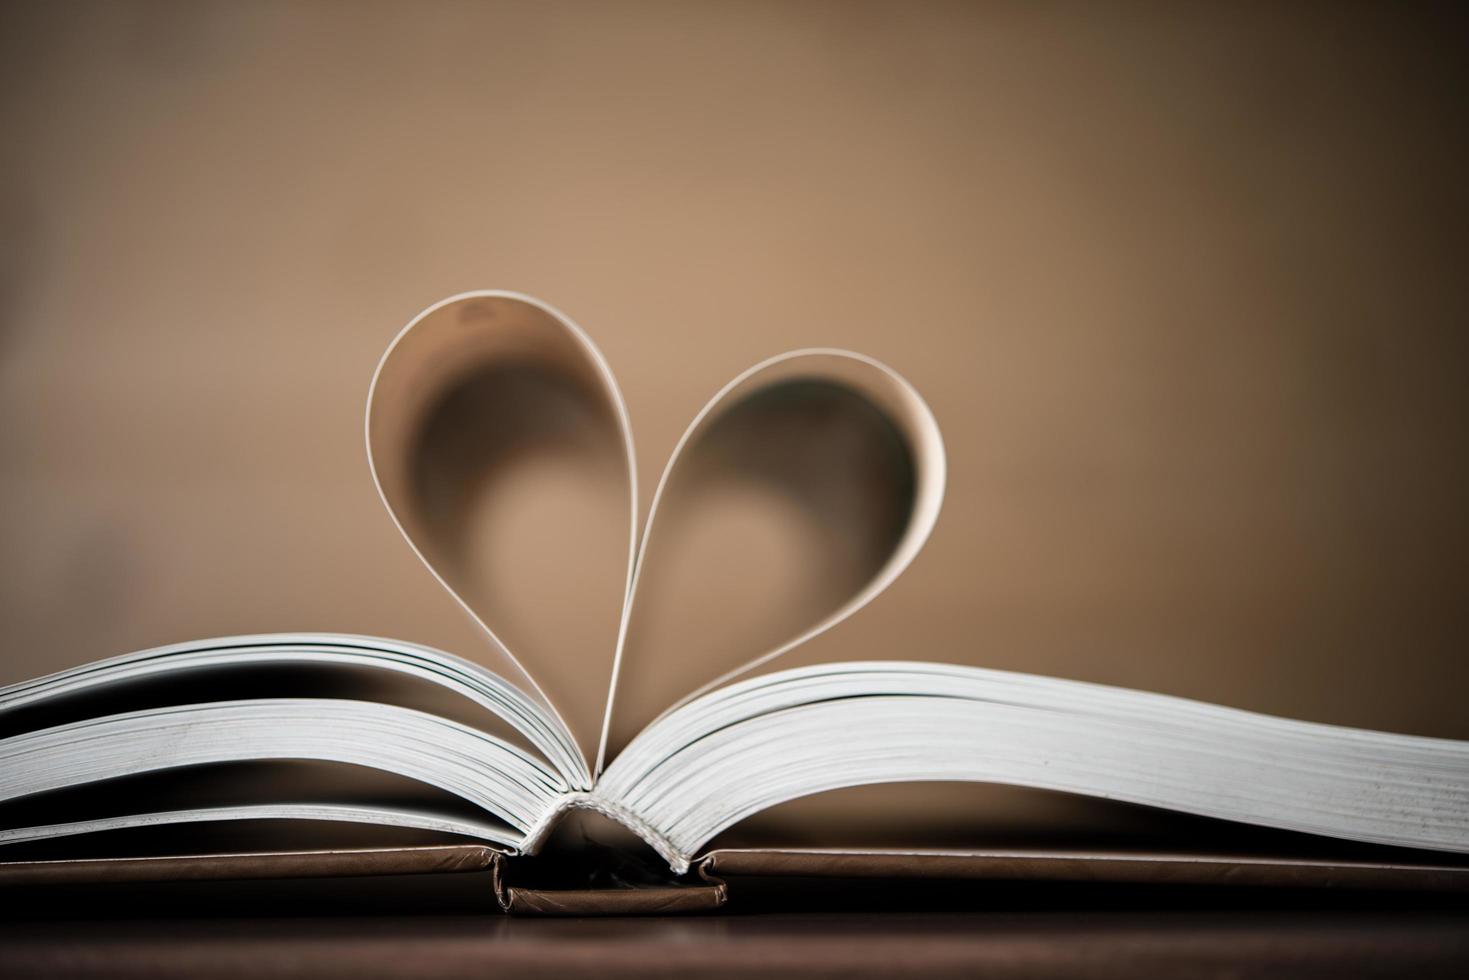 Pages of a book forming the shape of the heart photo